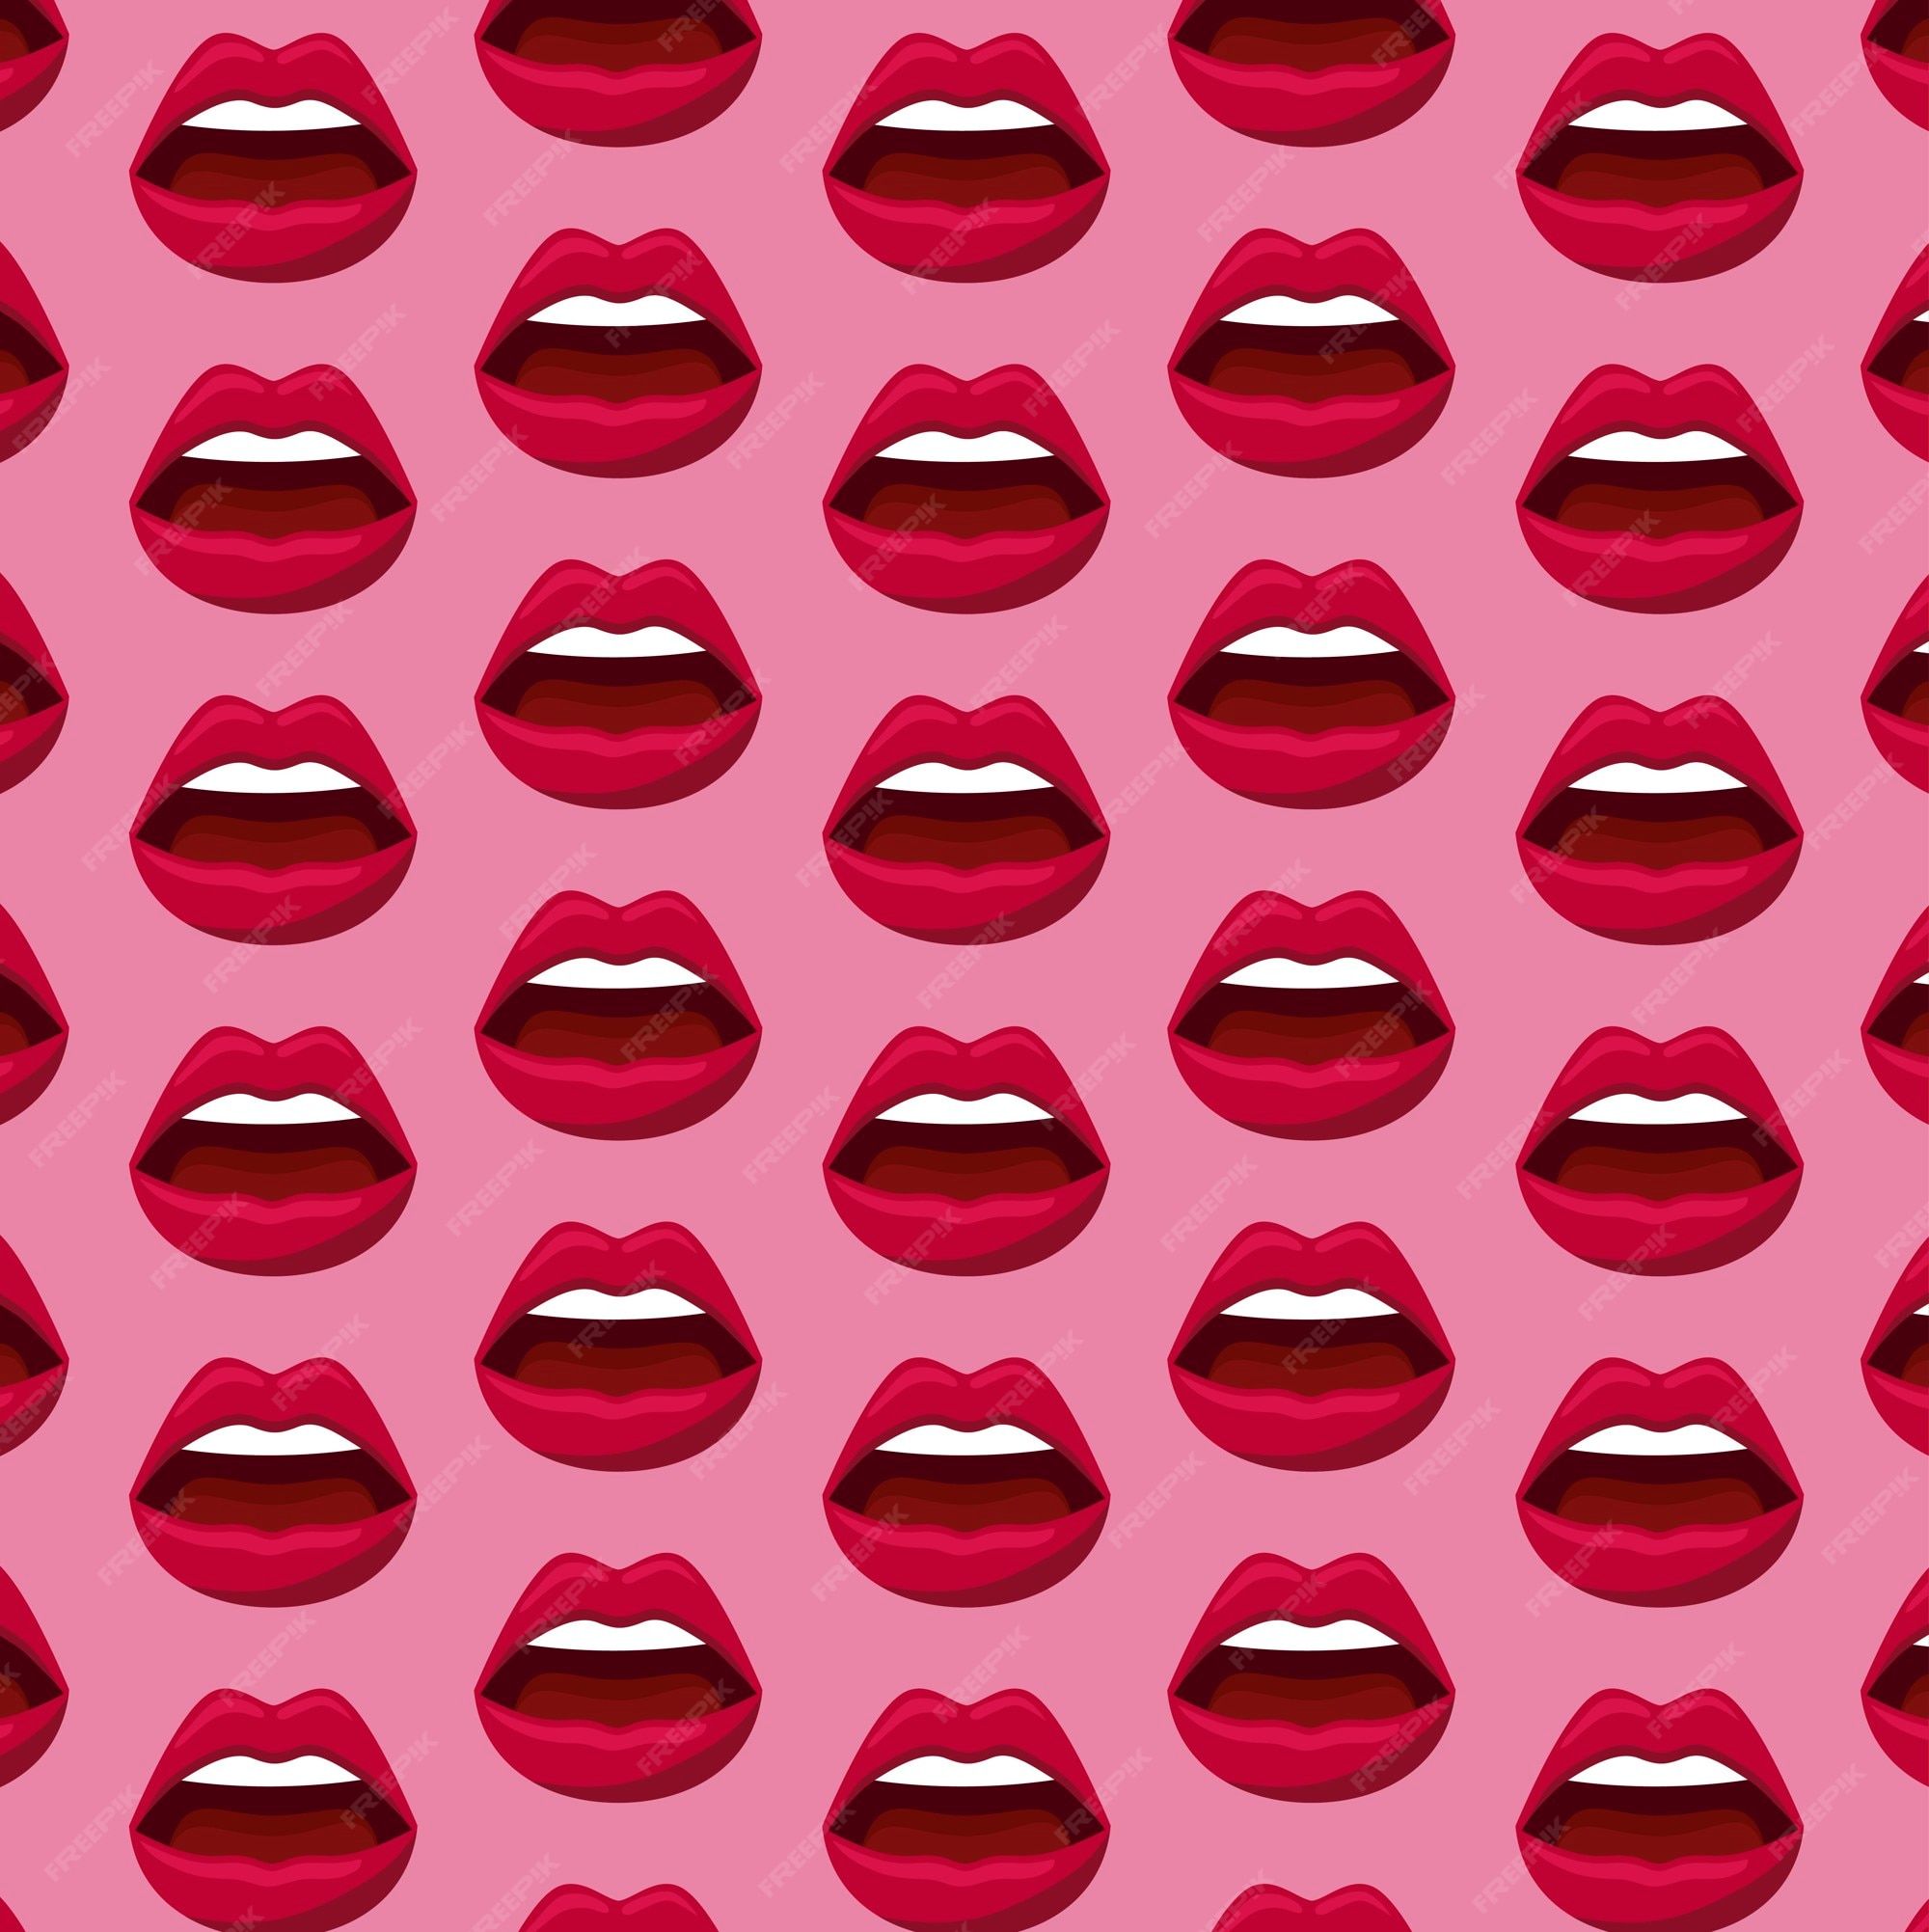 A pattern of red lips on a pink background - Lips